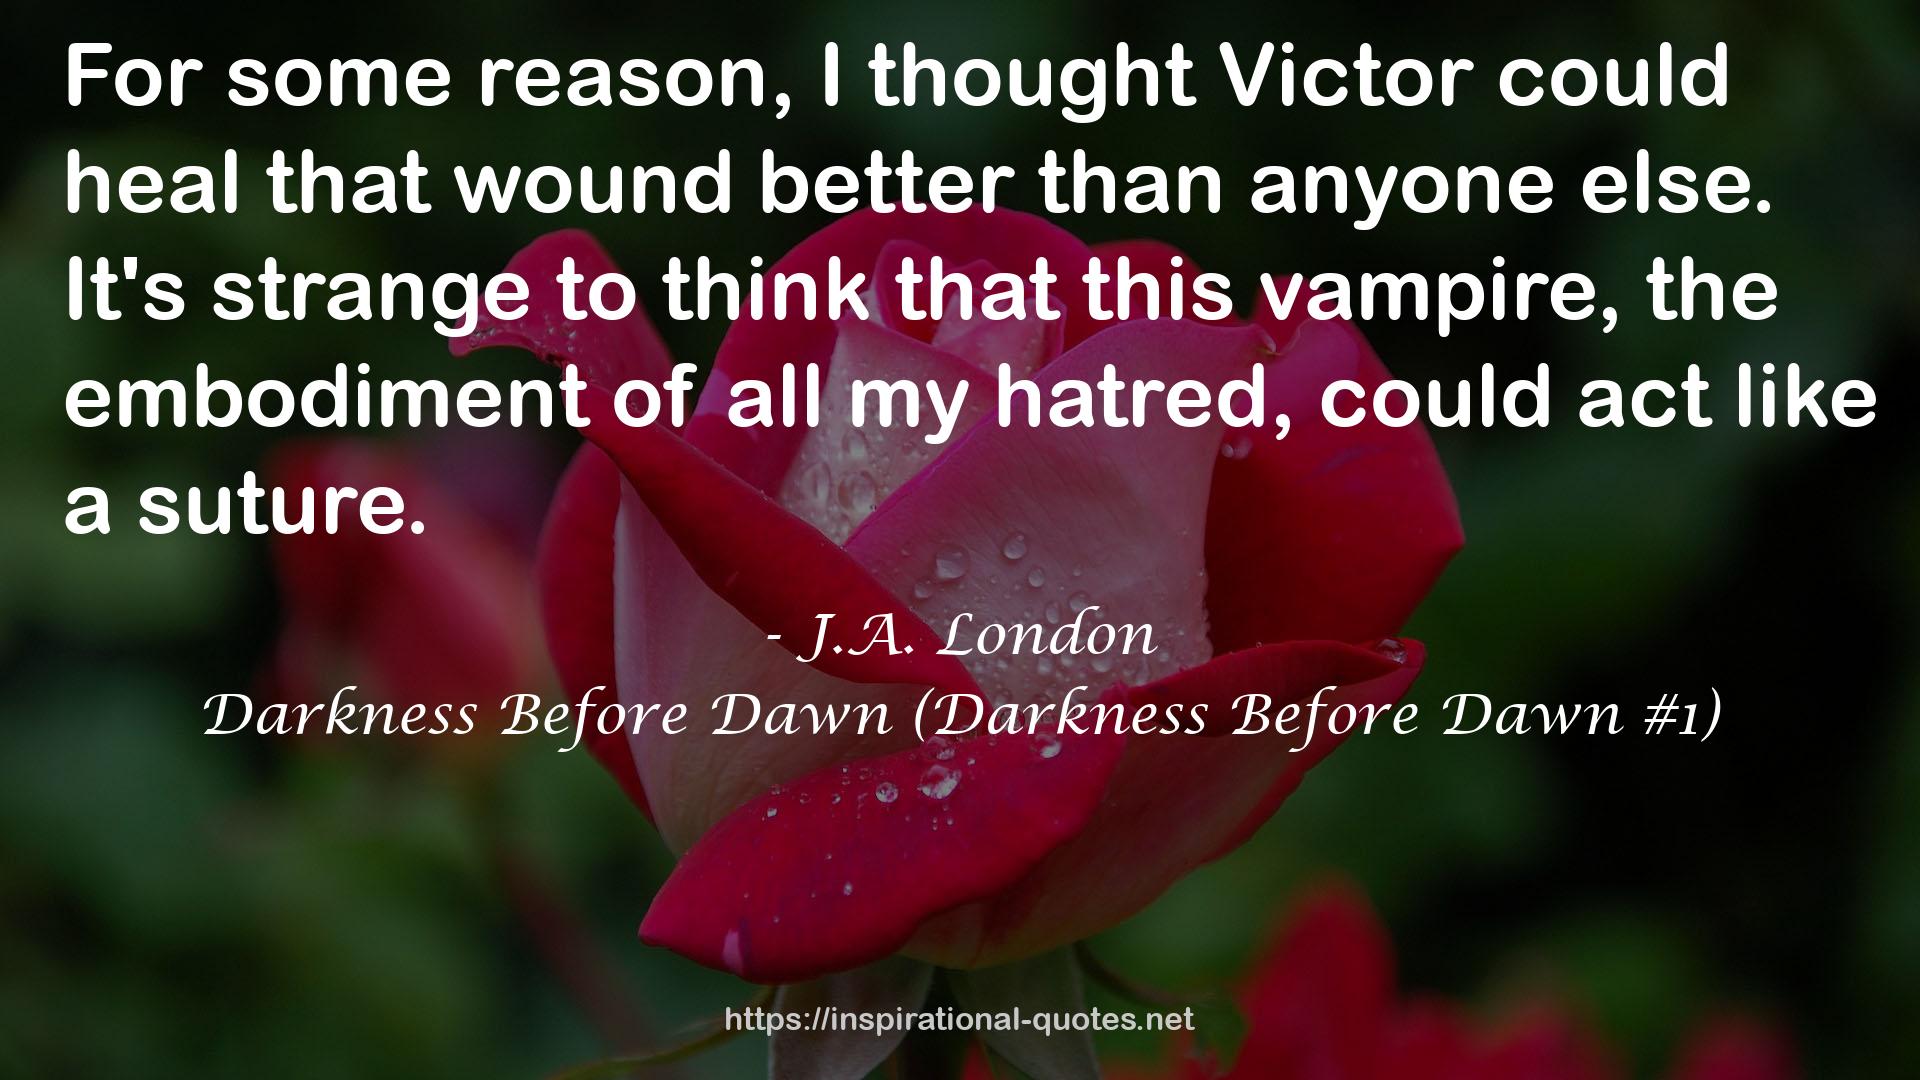 Darkness Before Dawn (Darkness Before Dawn #1) QUOTES